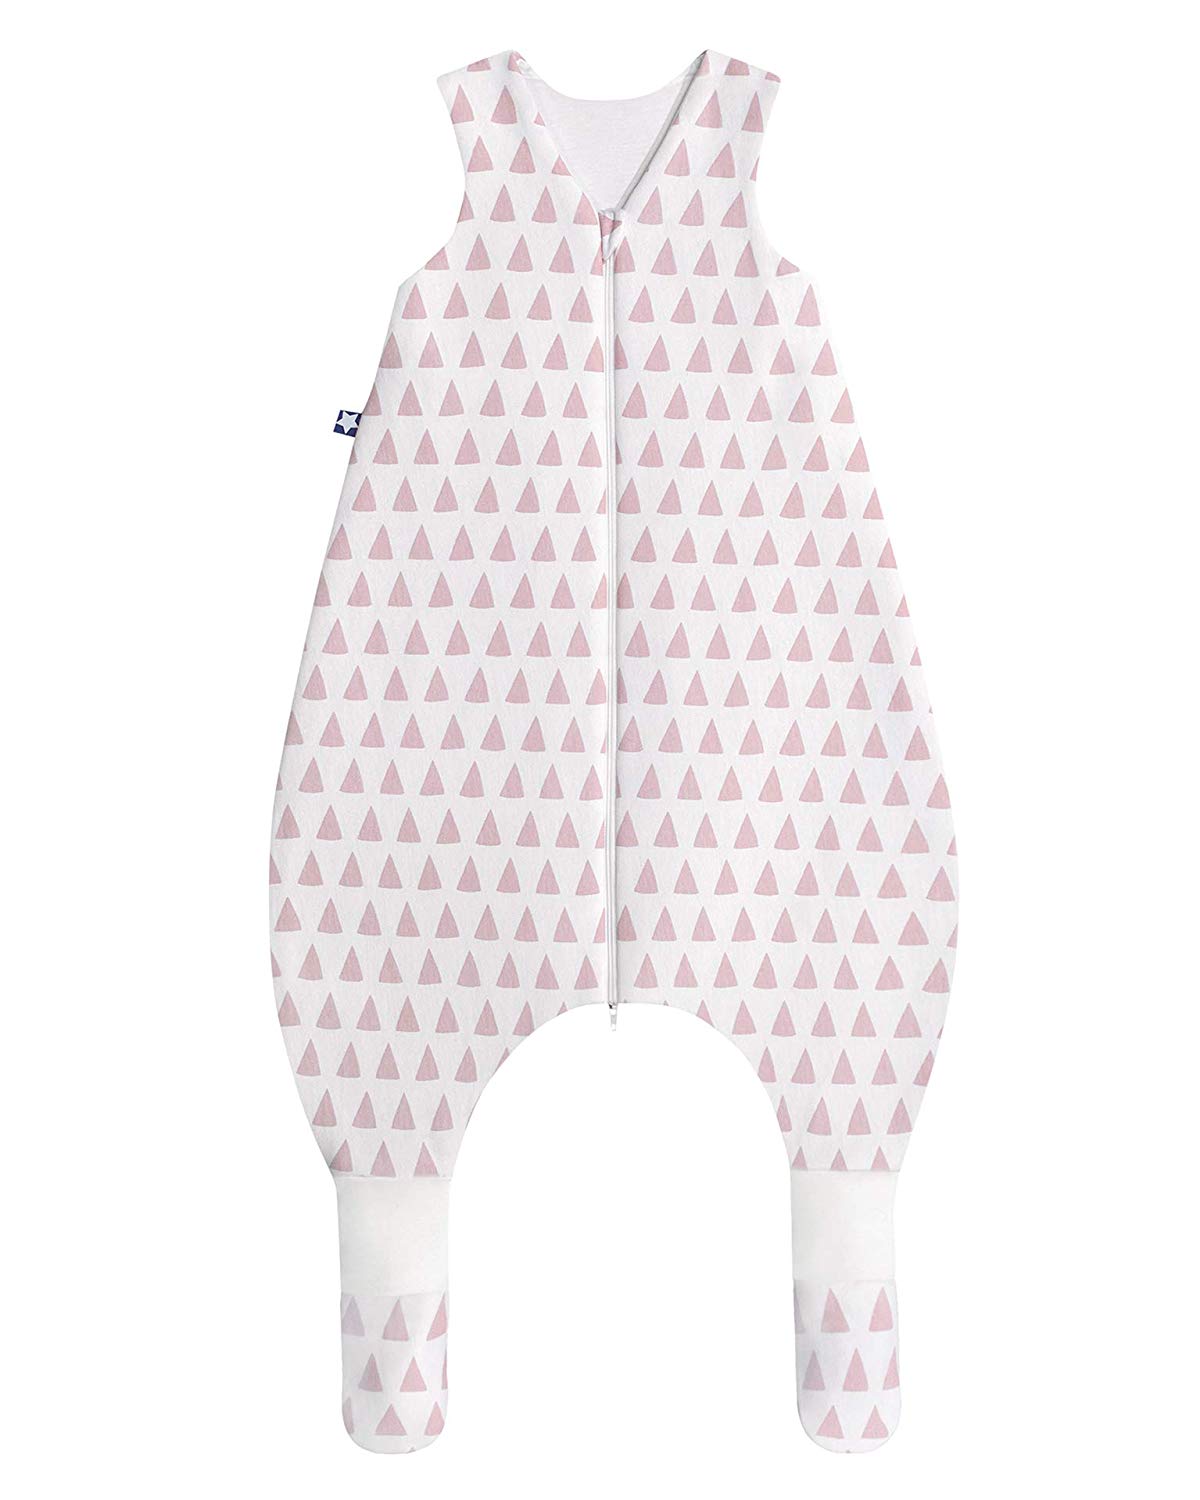 Julius Zöllner Jersey Jumper Plus Sleeping Bag with Legs and Feet, Various Designs and Sizes 10-18 Months / 80 cm